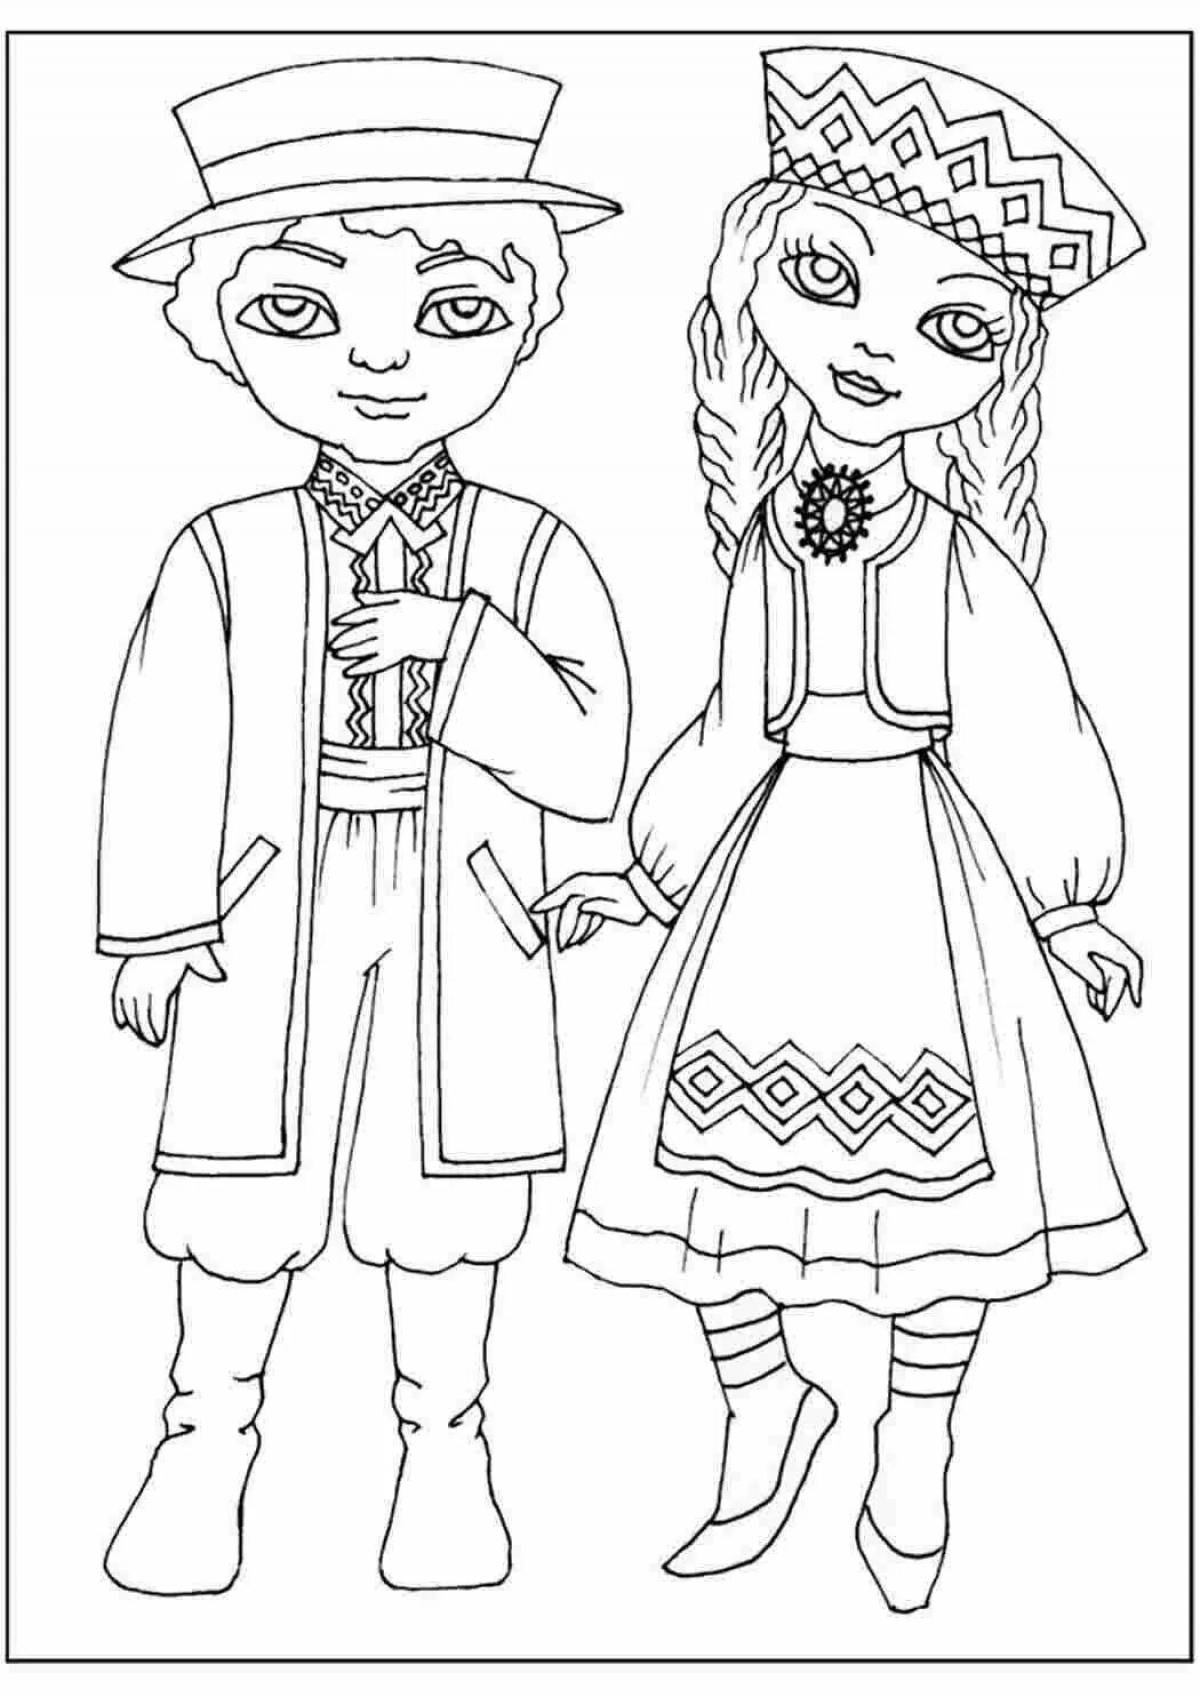 Coloring page playful belarusian national costume